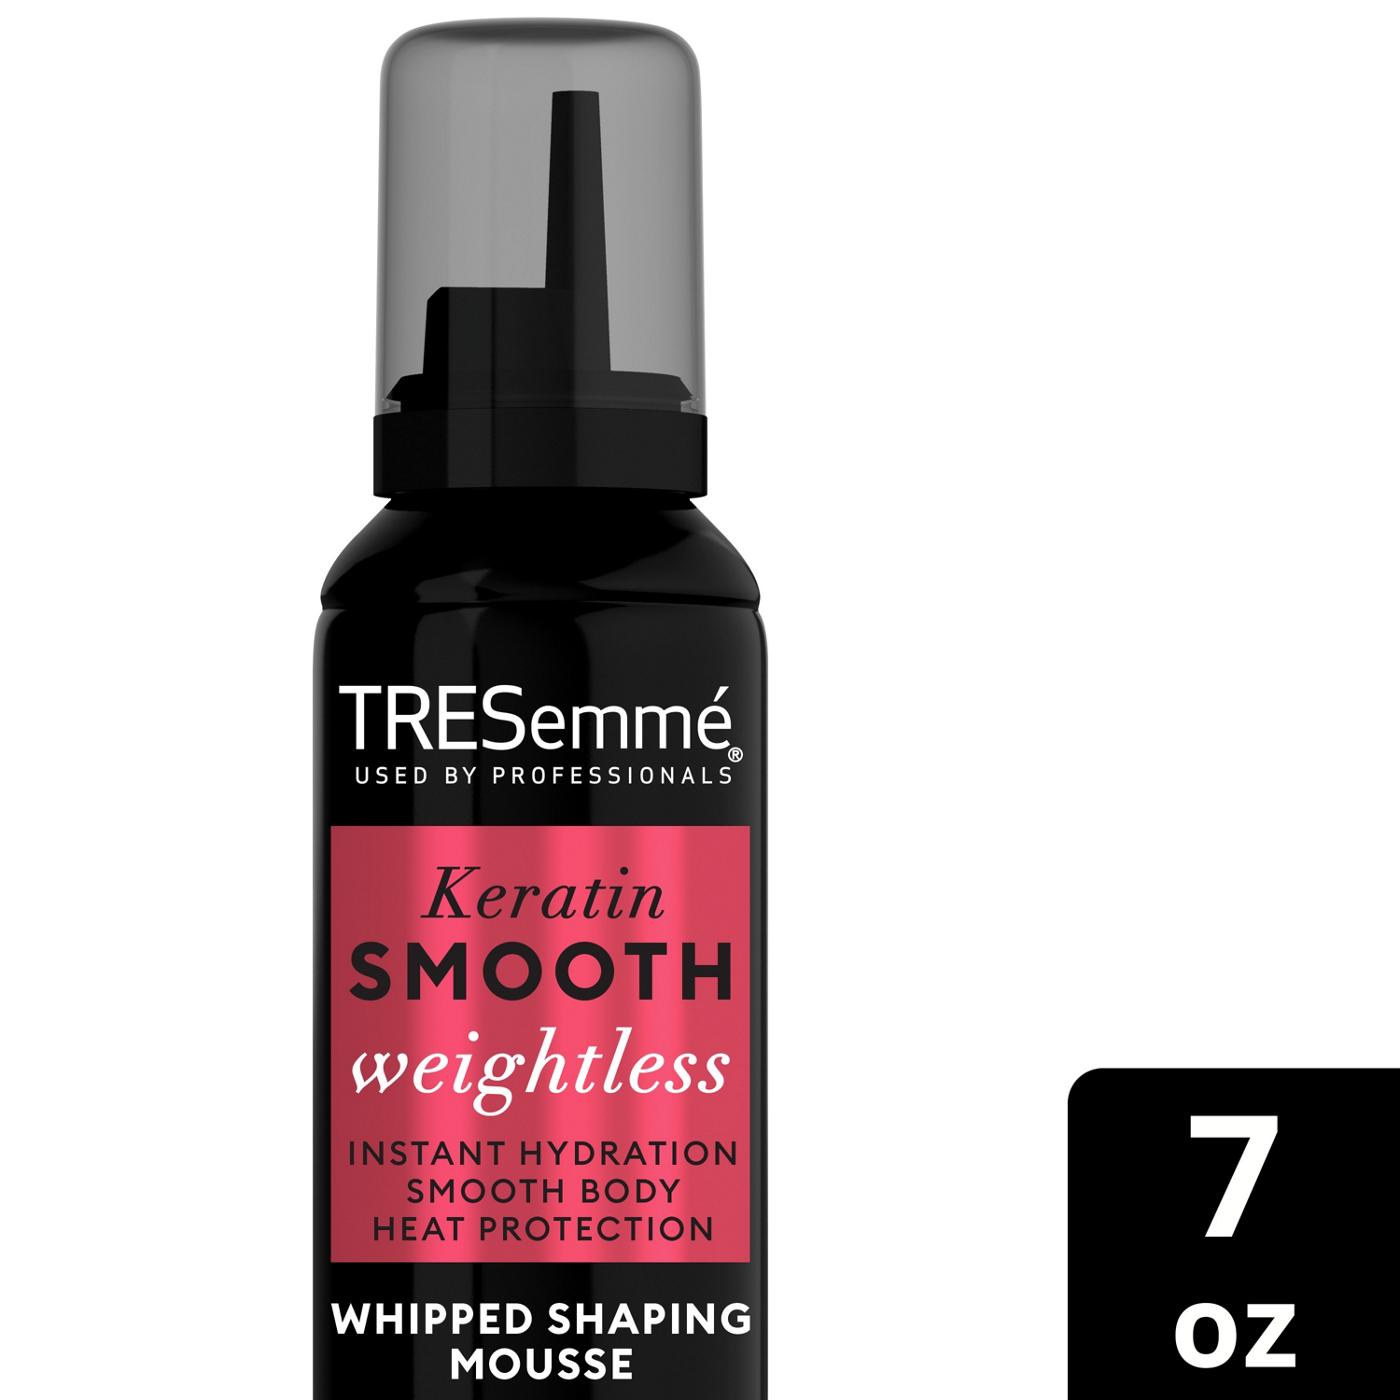 TRESemmé Get 3 days of weightlessly smooth hair with the TRESemmé Keratin Smooth Whipped Shaping Mousse. Say hey to all-day lift, smooth body, and high shine for all your sleekest, most voluminous styles. This salon-quality whipped shaping mousse provides you with lasting hold, instant hydration, and major volume so you can reach all of your hair goals. Give your hair an immediate boost of moisture and frizz-defeating smoothness without ever feeling greasy or heavy. You'll love the way your hair looks and feels! Perfect your Smooth Blowout in 3 easy steps. Prep strands with Keratin Smooth Shampoo and Conditioner, then style with Keratin Smooth Mousse. Start by shaking the can and dispensing 2 to 3 dollops of mousse into the palms of your hands. Spread the mousse evenly into damp hair, from roots to tips, before blow drying and styling your hair. Finish your smooth, sleek look with our Keratin Smooth Anti-Frizz Finishing Spray. Since 1948, TRESemmé has been dedicated to providing professional-quality results to empower YOU to express your style. Our unique formulas are PETA-approved and made with carefully selected ingredients, and TRESemmé never tests on animals. We're always made with intention and inspired by the latest trends and style.; image 4 of 4